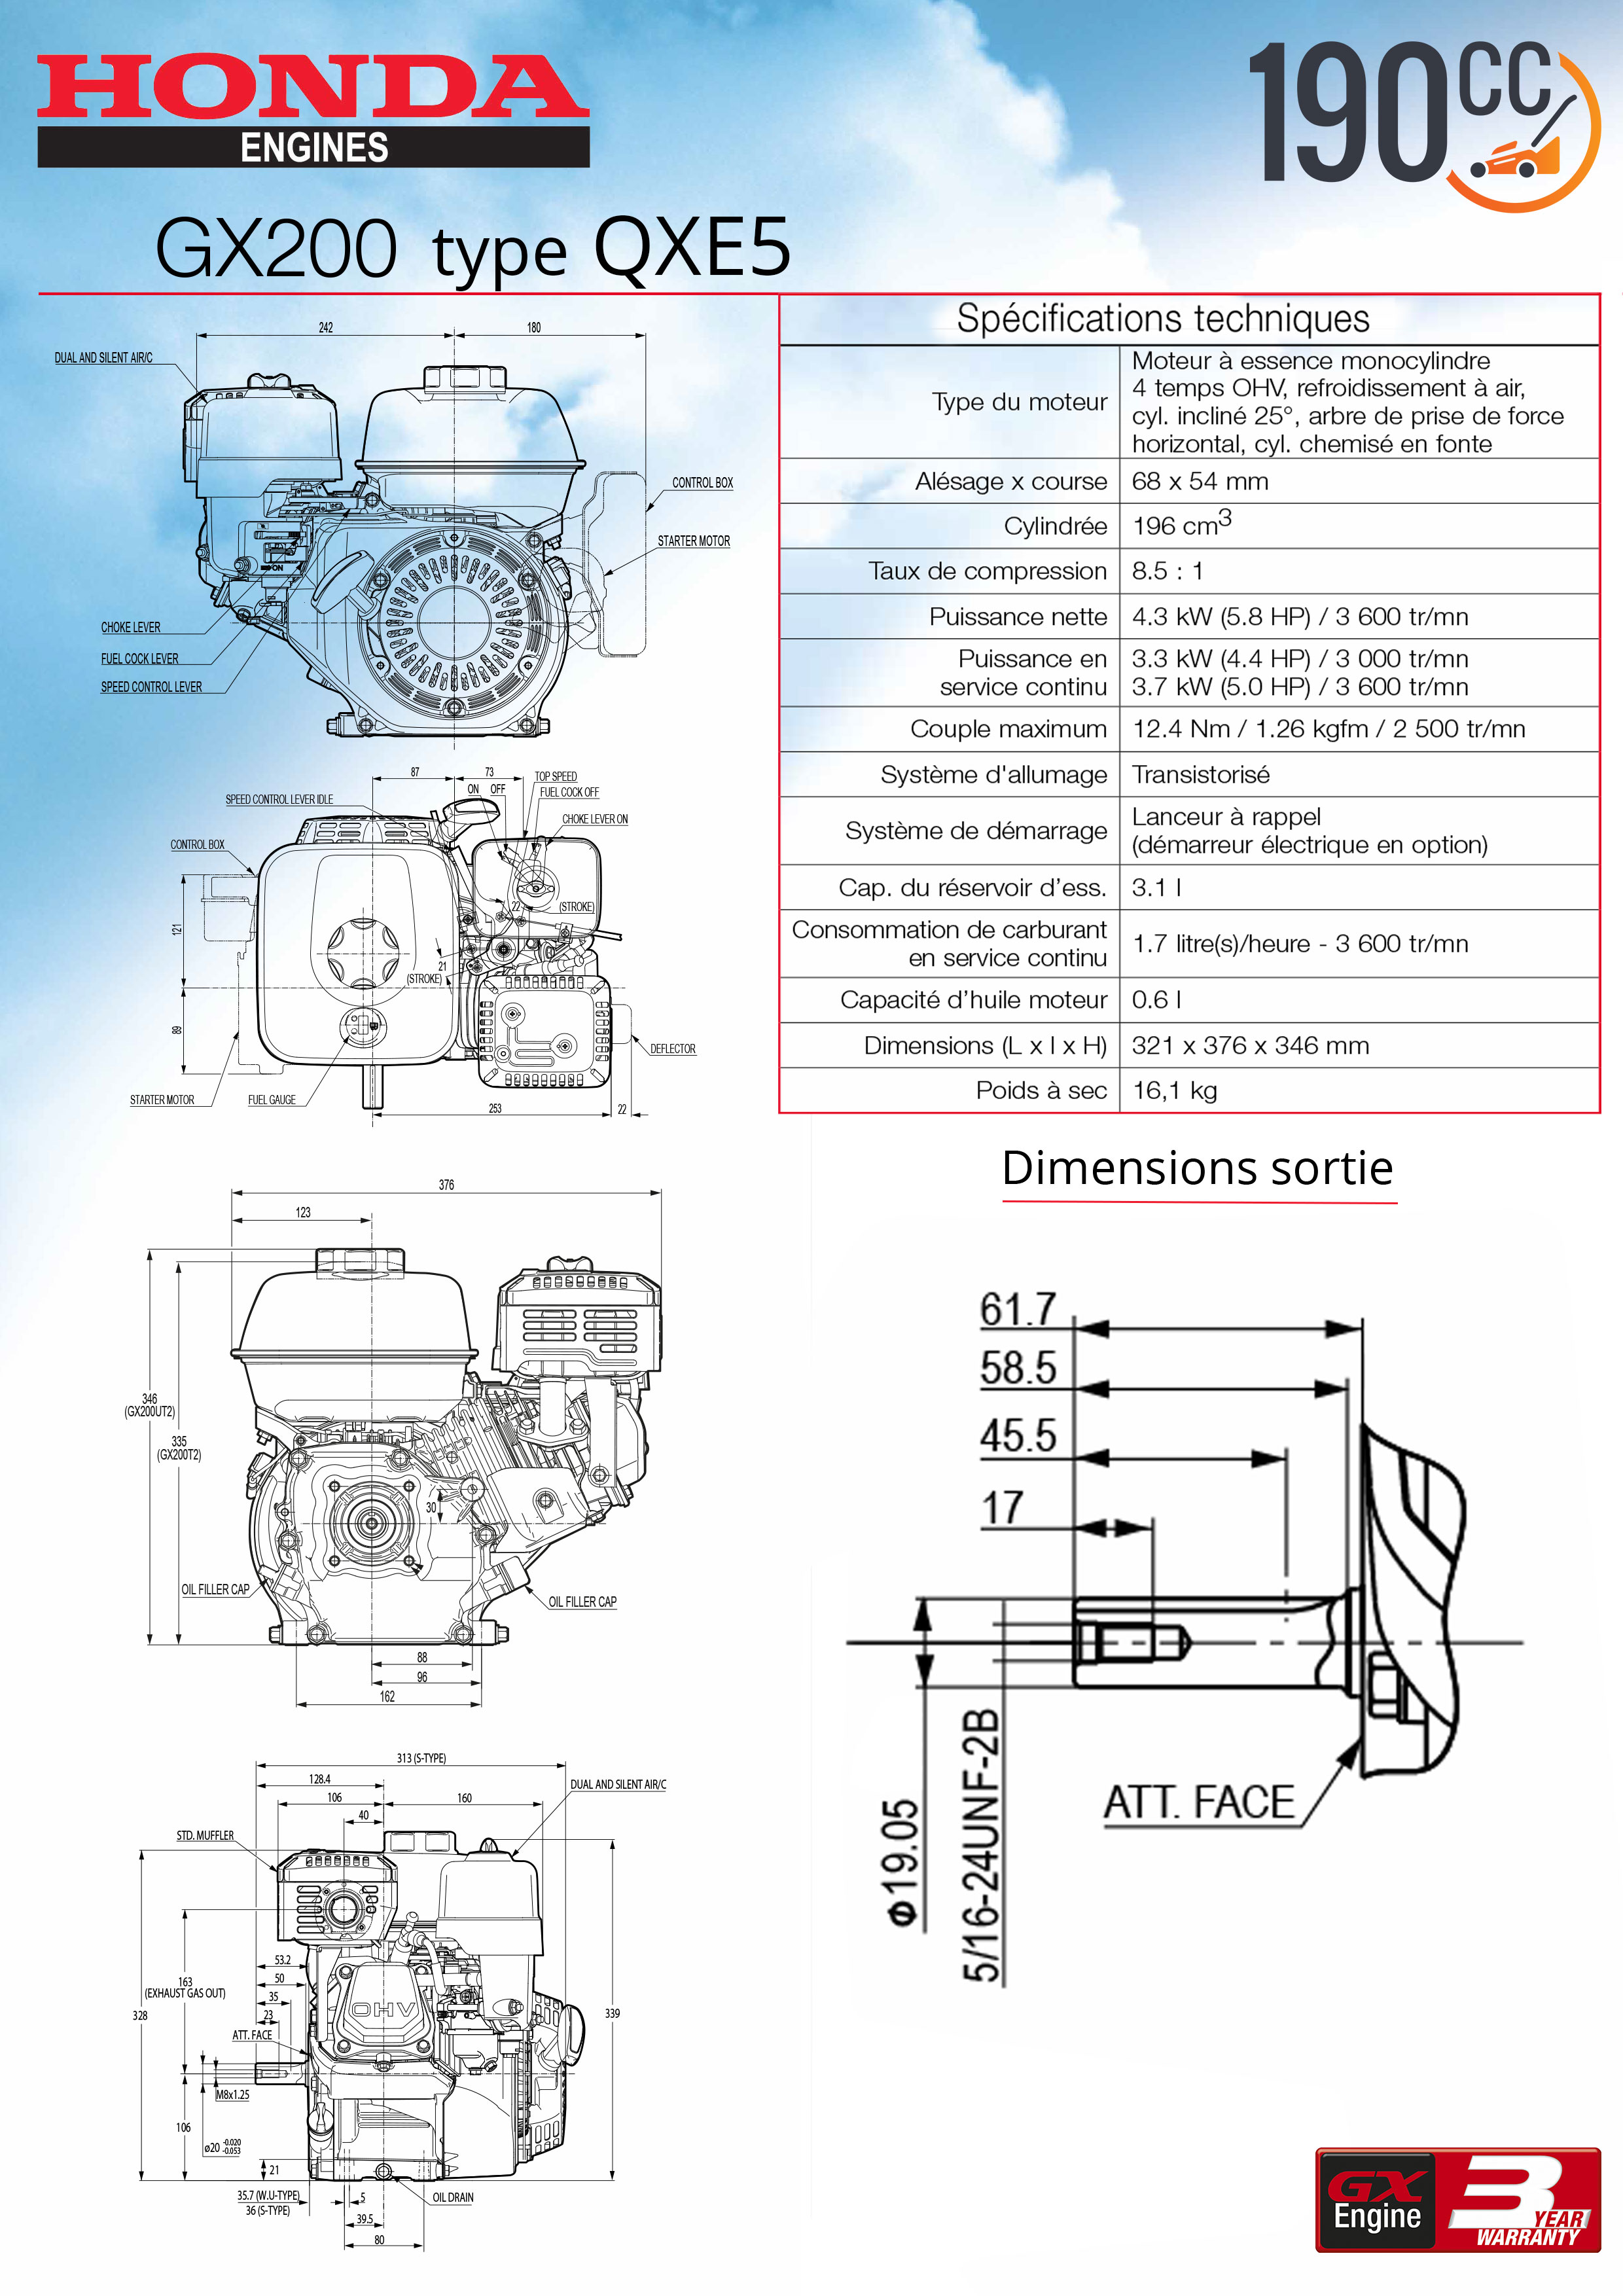 Specifications GX200 QXE5